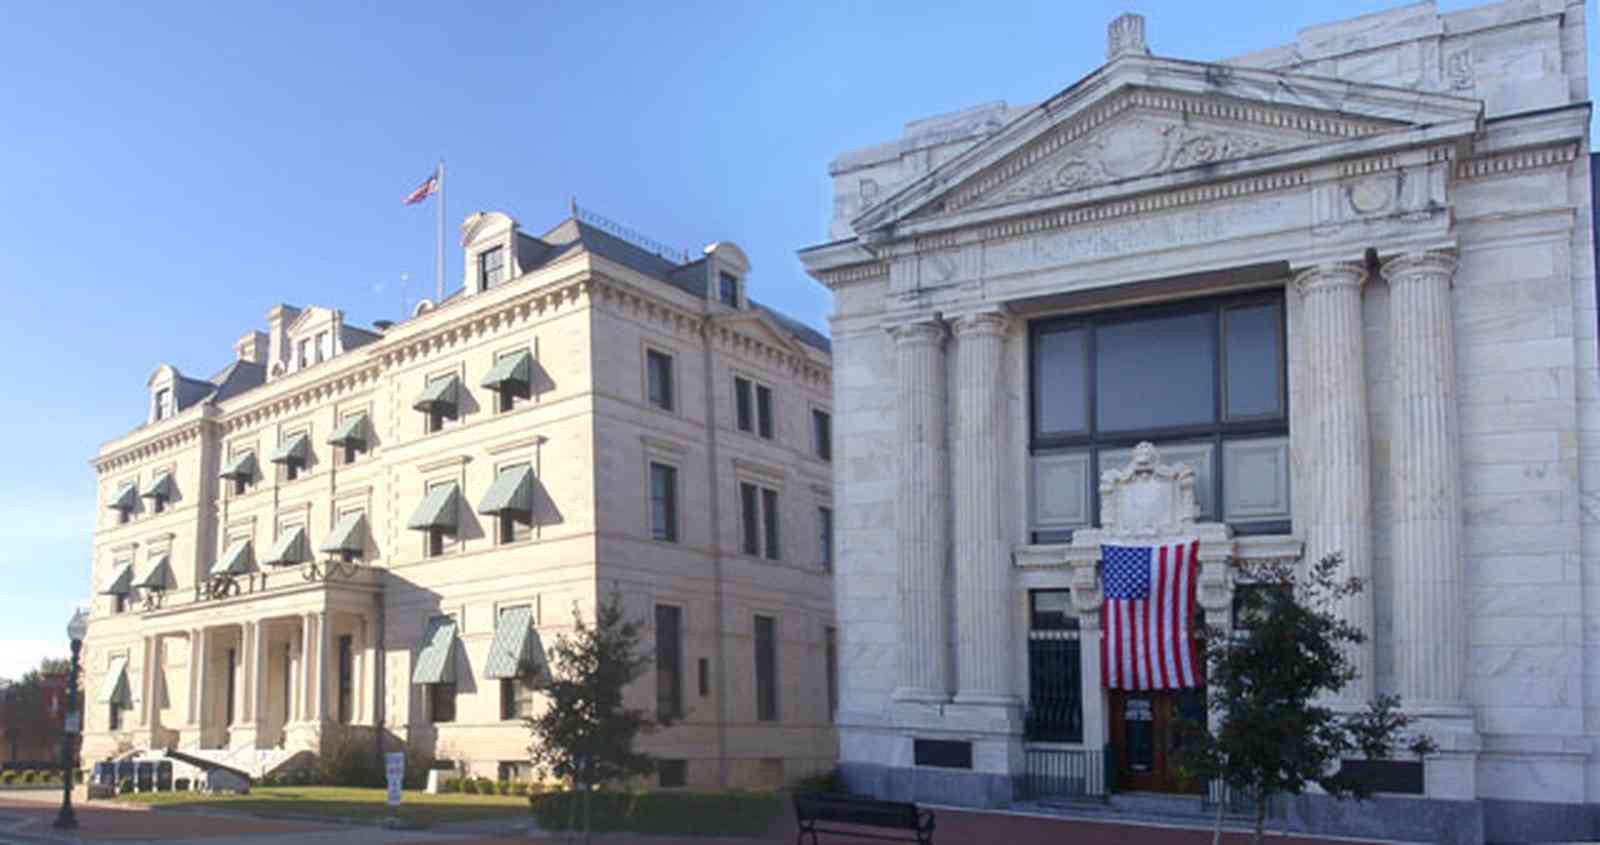 Pensacola:-Palafox-Historic-District:-Escambia-County-Courthouse_00.jpg:  classical revival architectural style, marble, bank building, courthouse